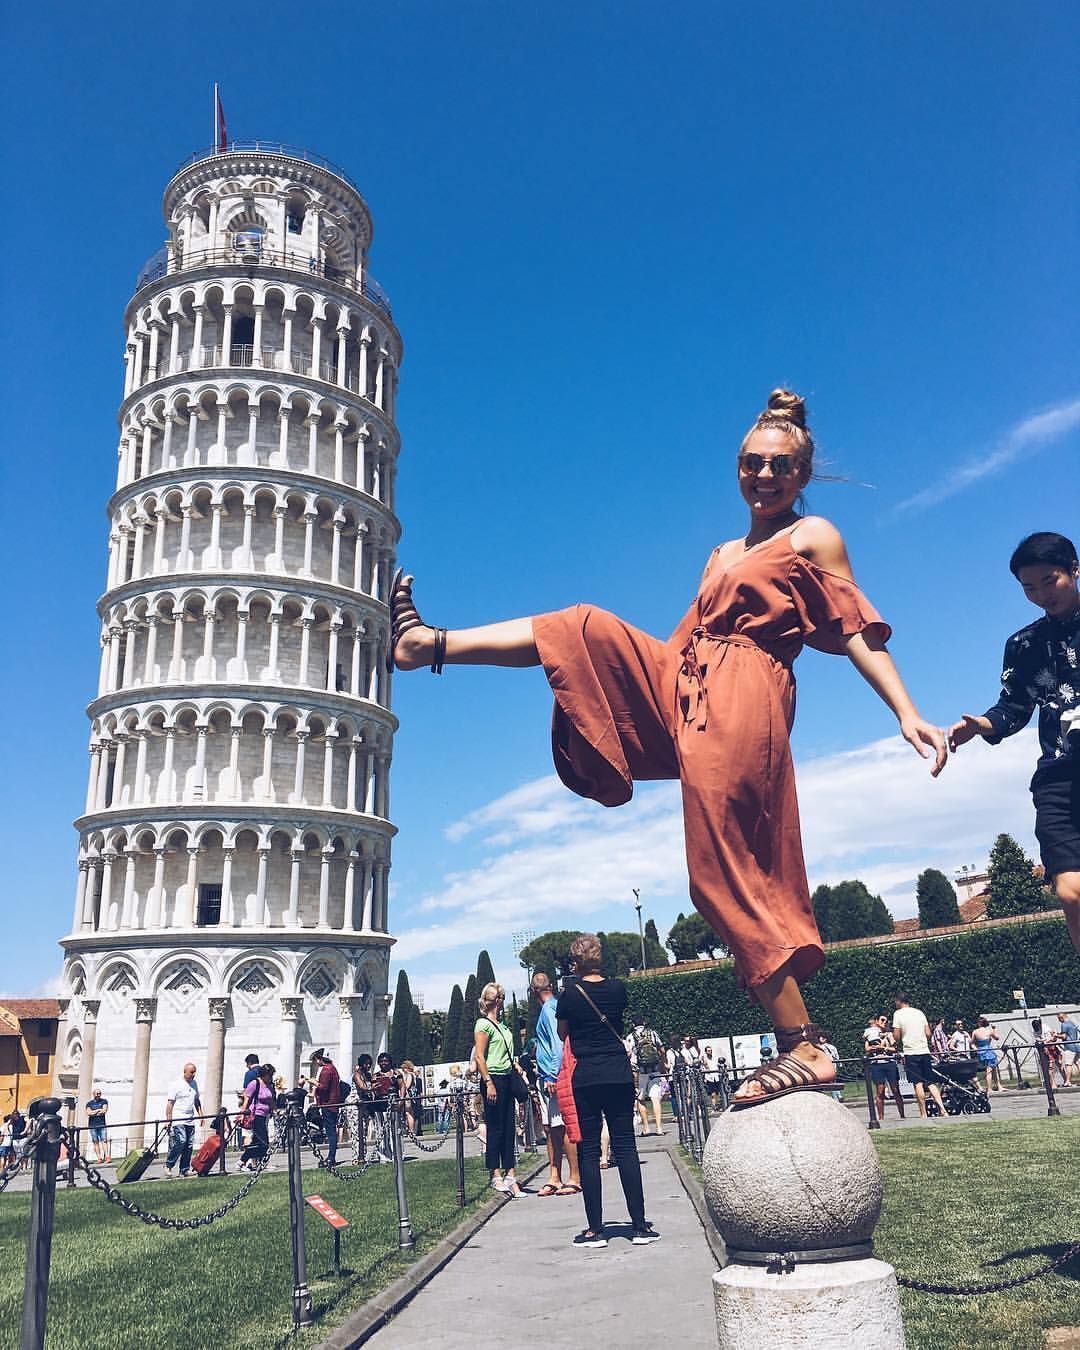 Woman posing by the Tower of Pisa in Italy with her foot up